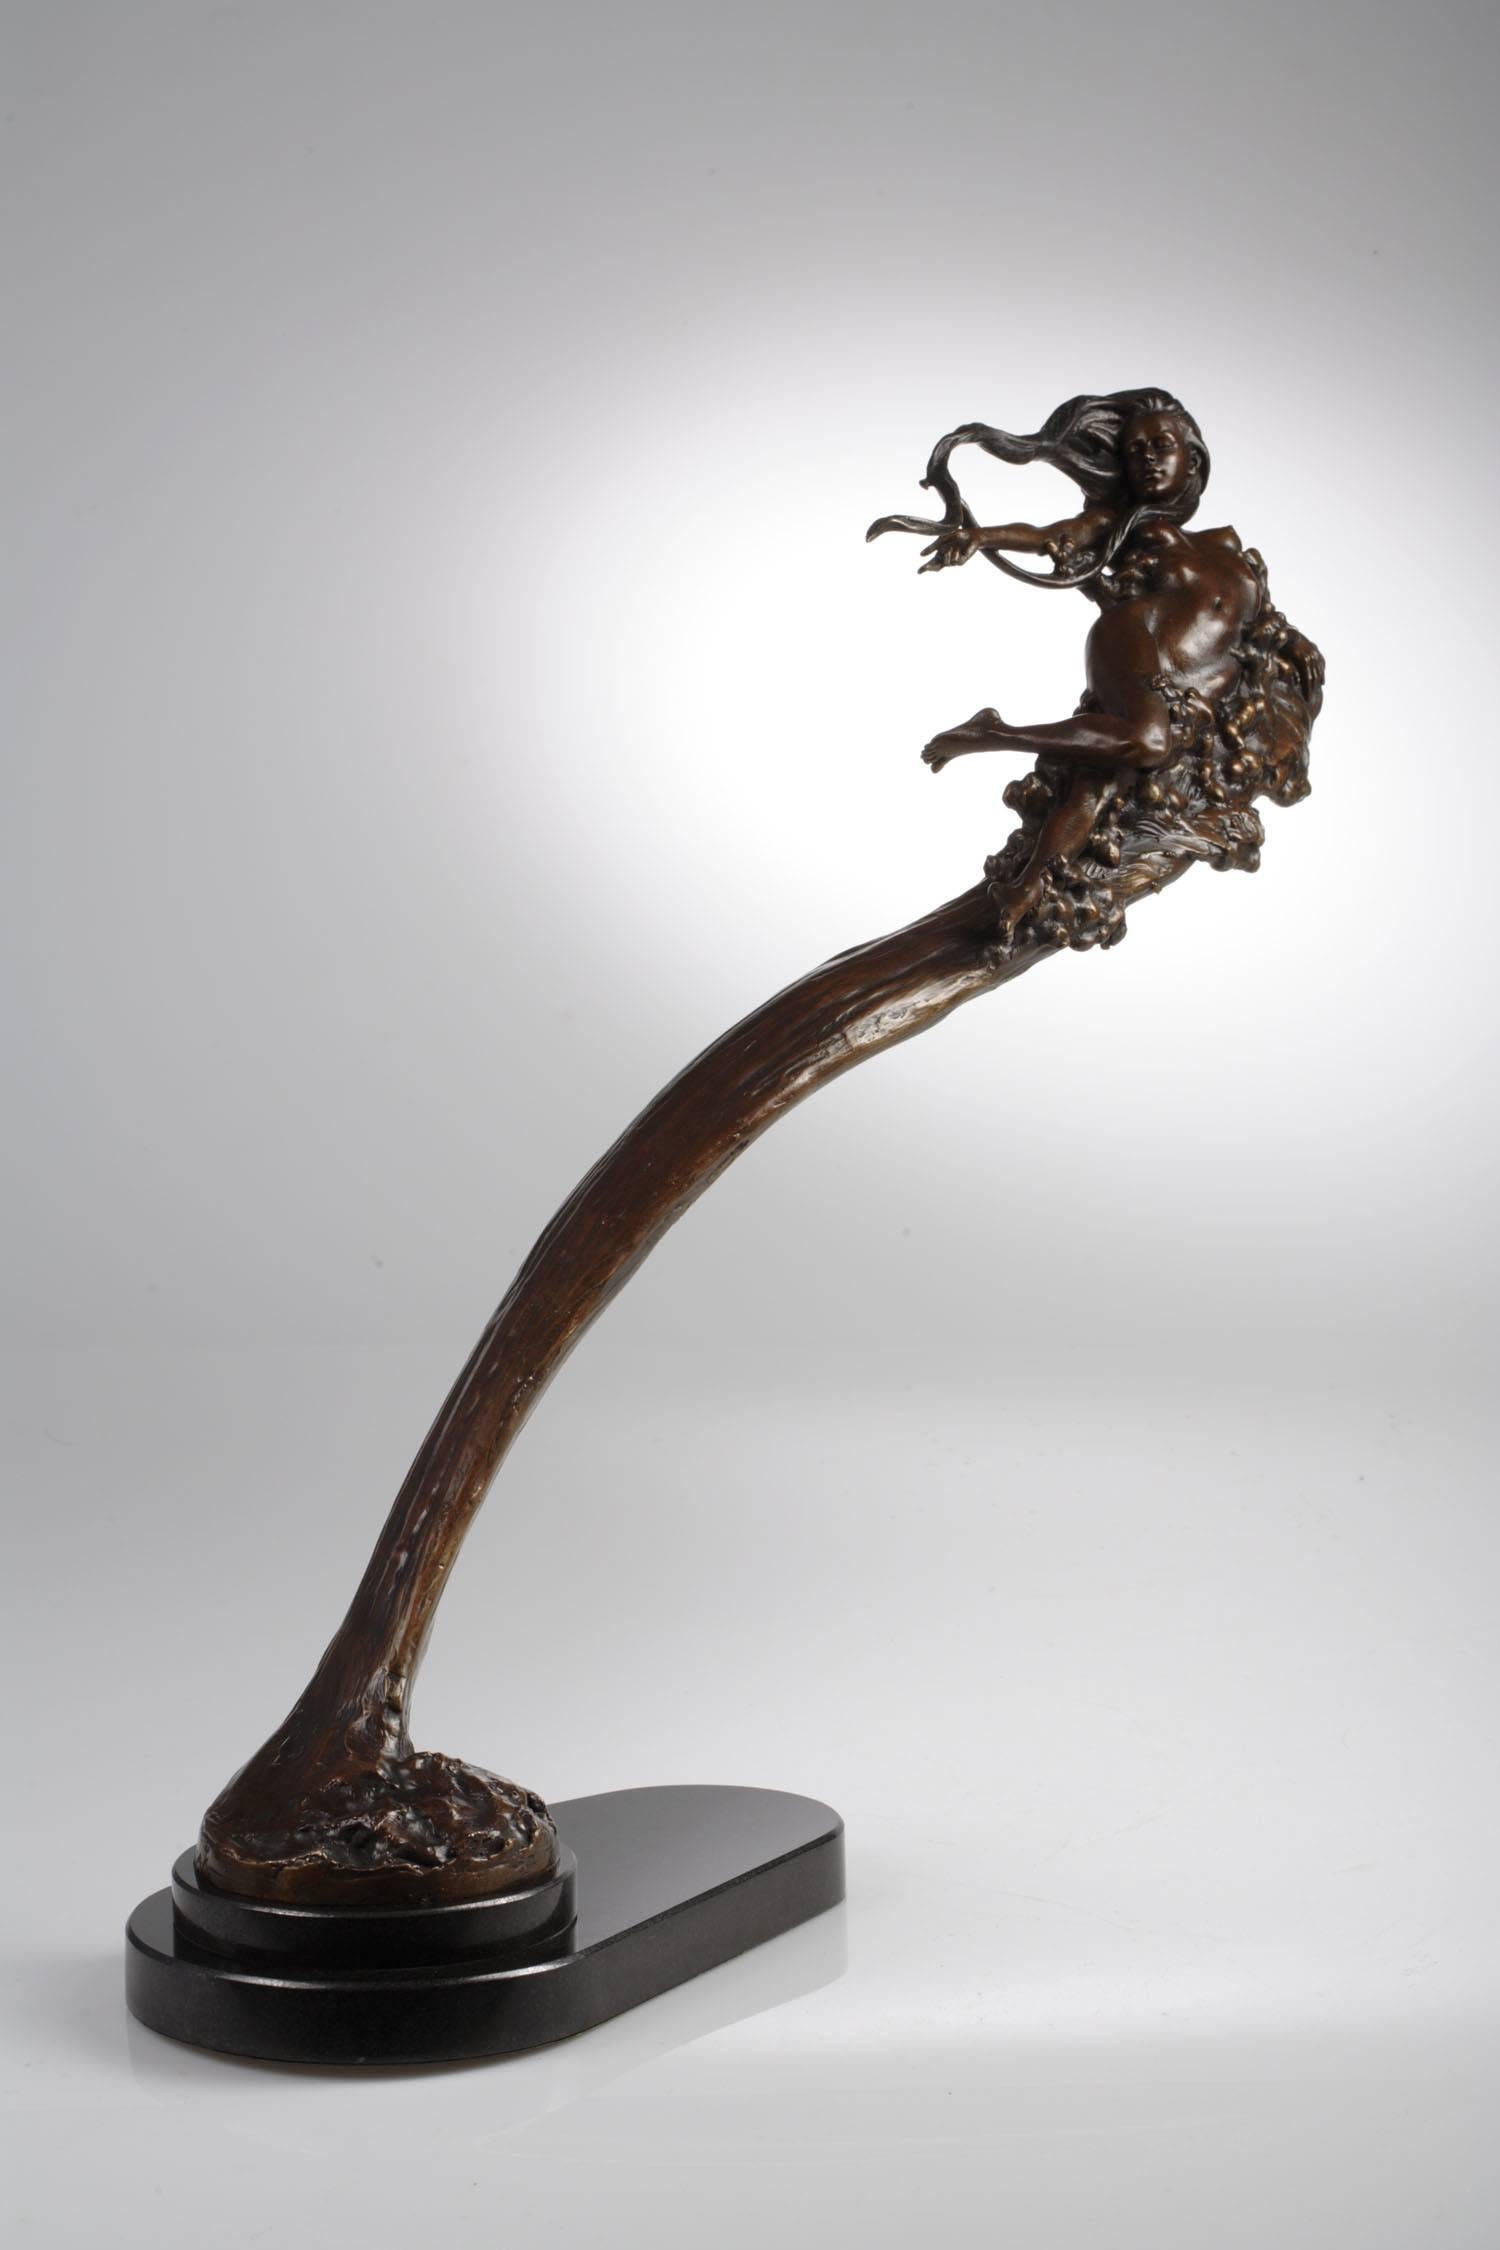 Nude Bronze Figurative Sculpture 'Morning Glory' by Carl Payne